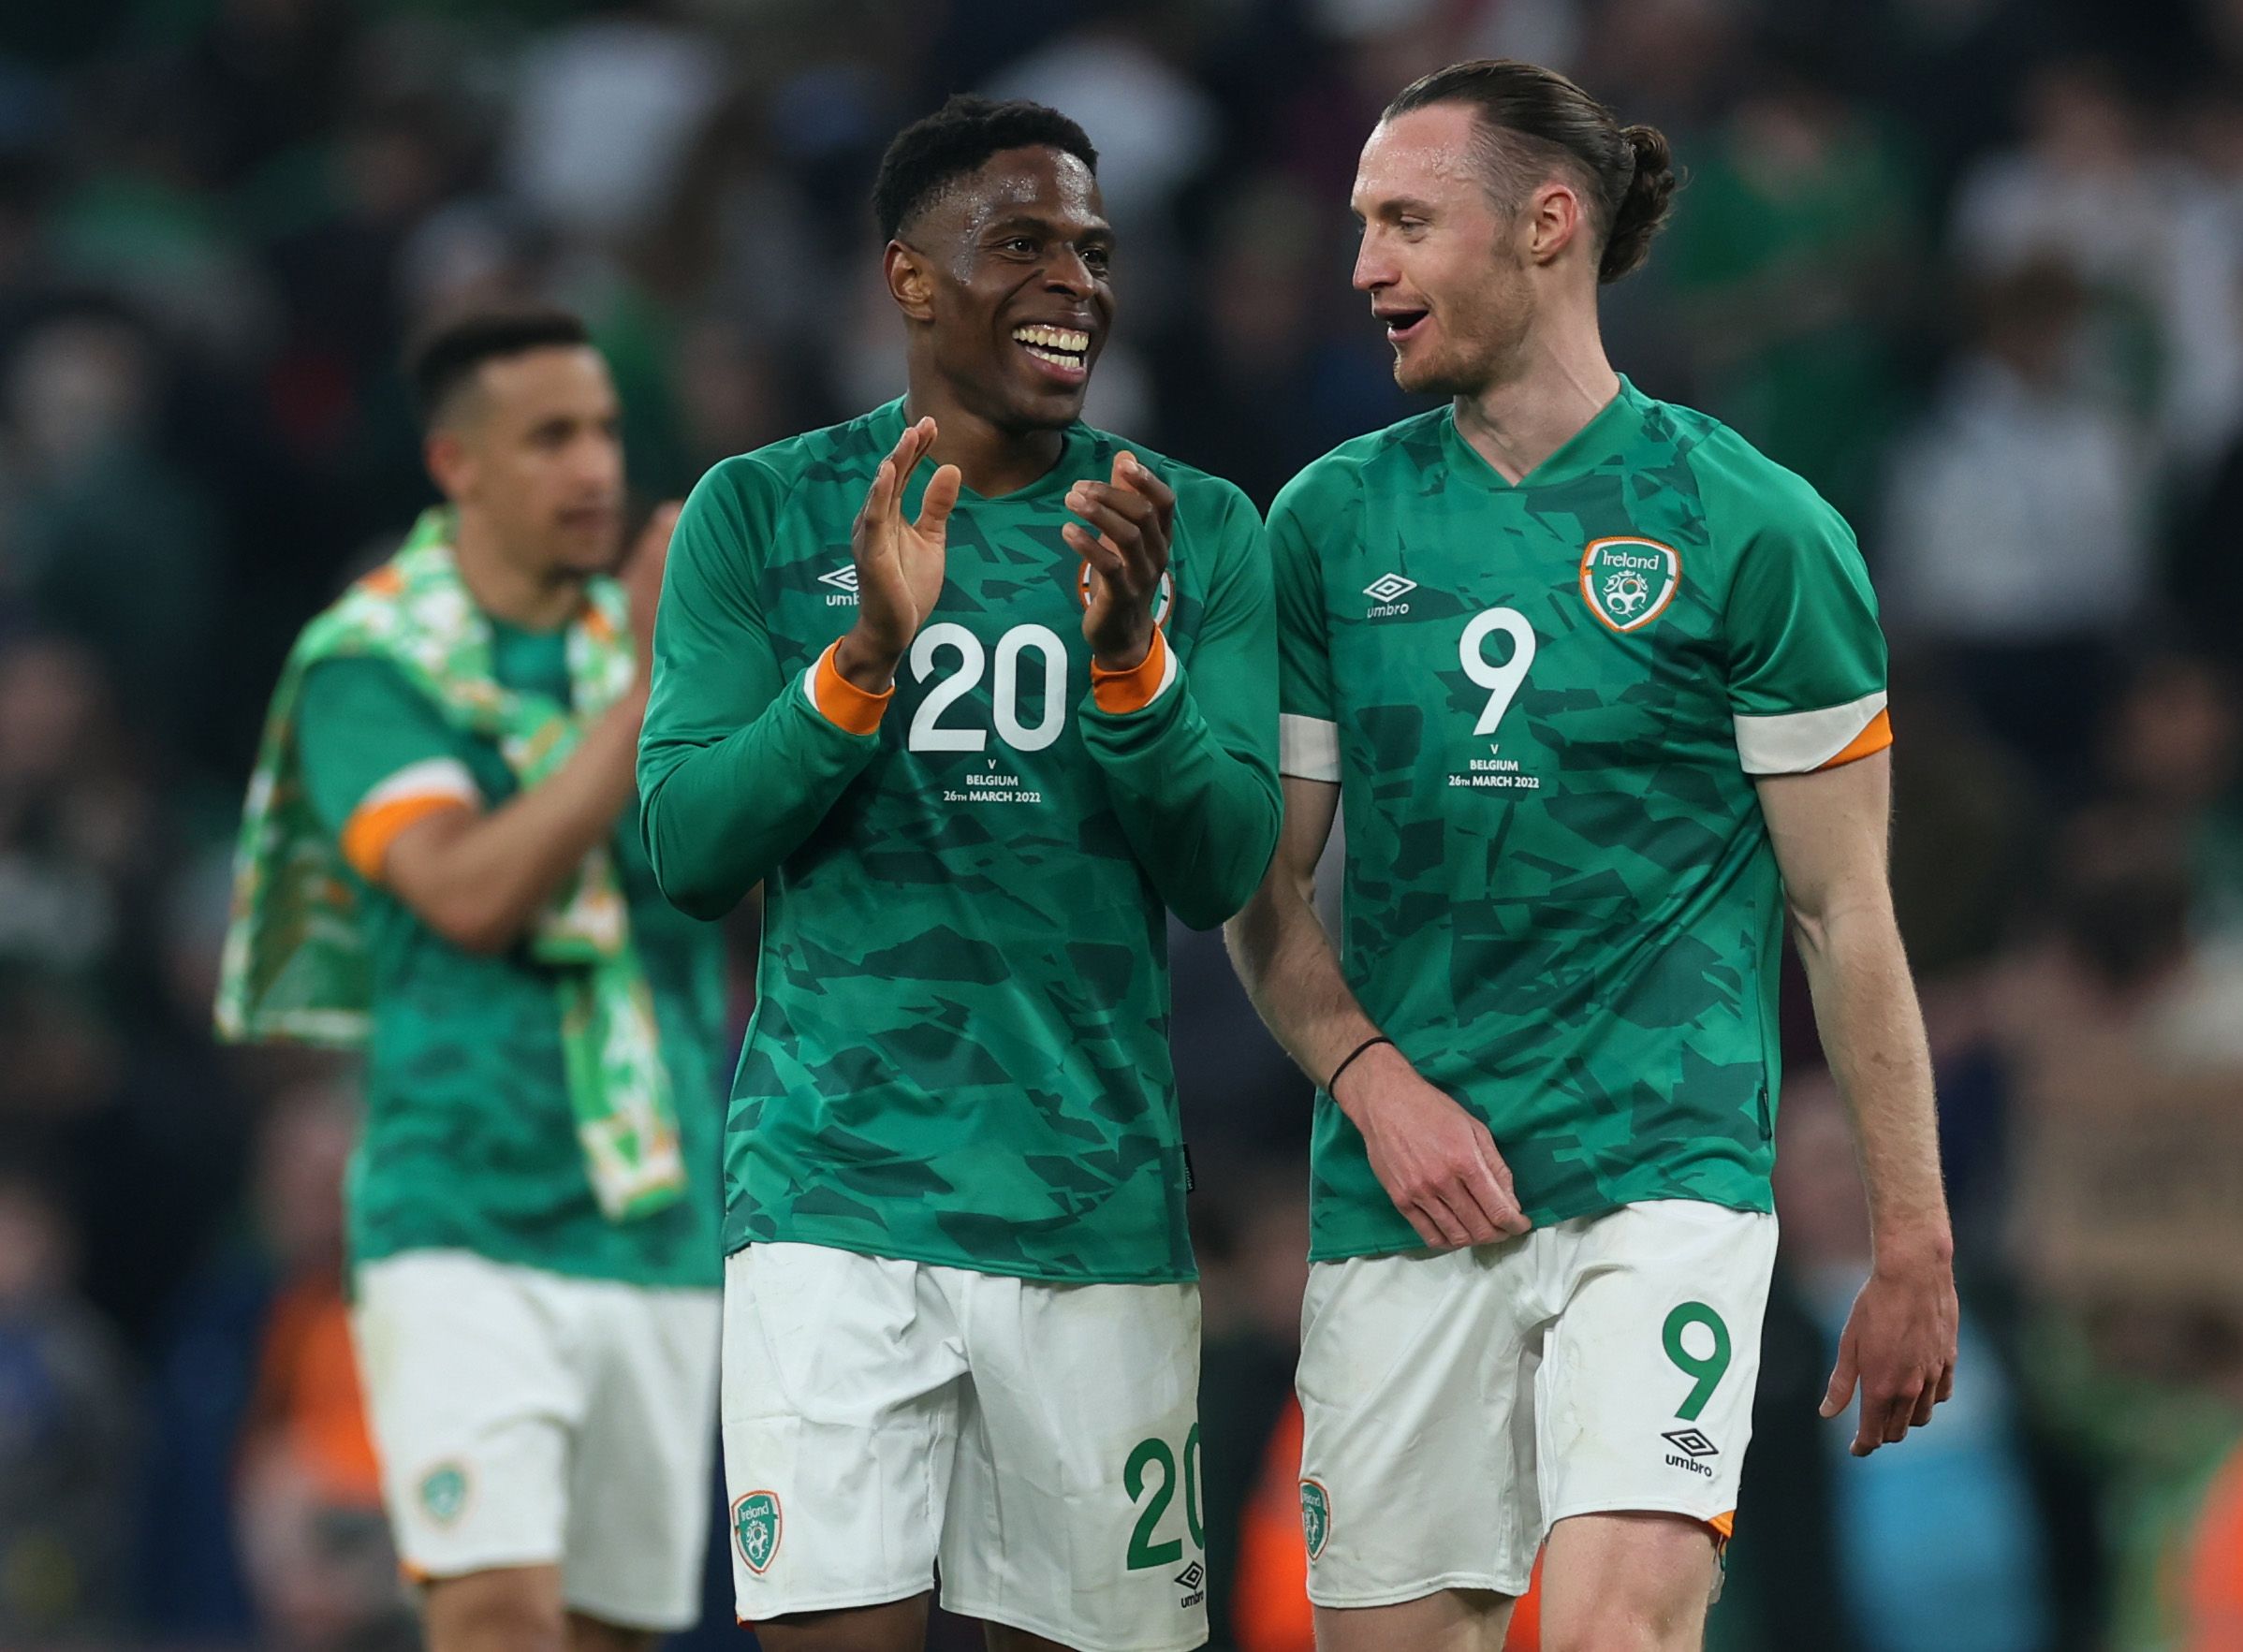 Soccer Football - International Friendly - Republic of Ireland v Belgium - Aviva Stadium, Dublin, Republic of Ireland - March 26, 2022 Republic of Ireland's Chiedozie Ogbene celebrates with Will Keane after the match Action Images via Reuters/Paul Childs